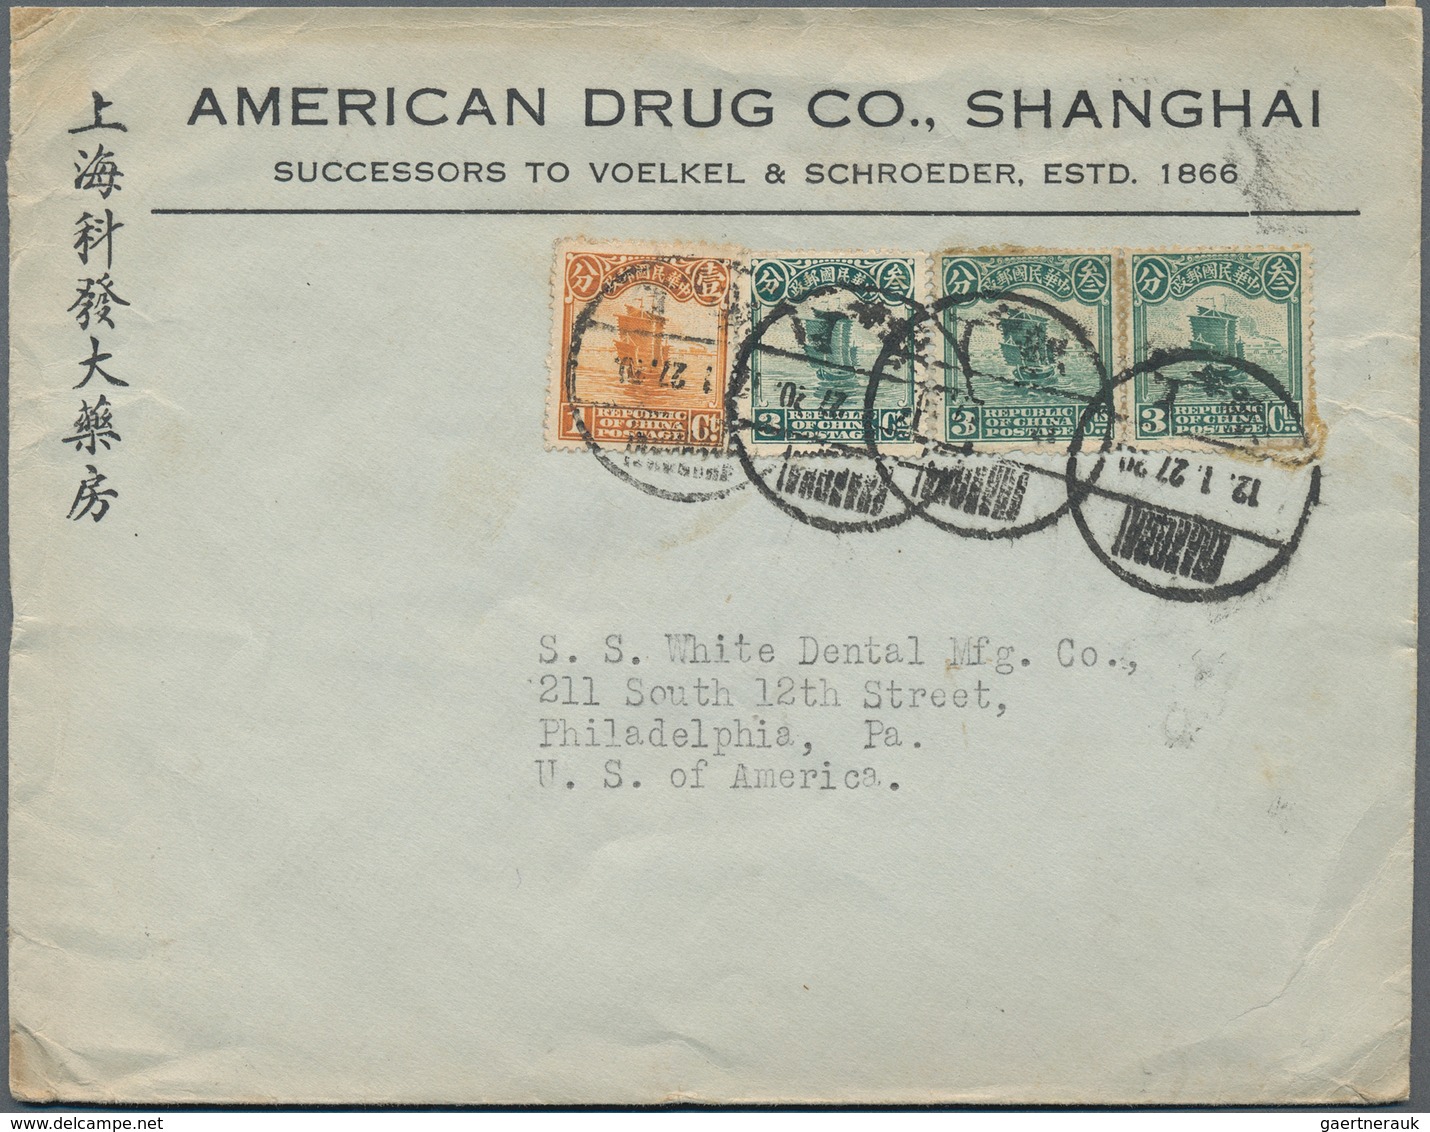 China: 1913/15, junk London- or 1st Peking print covers (6) inc. 1/2 S. on unsealed print envelope w